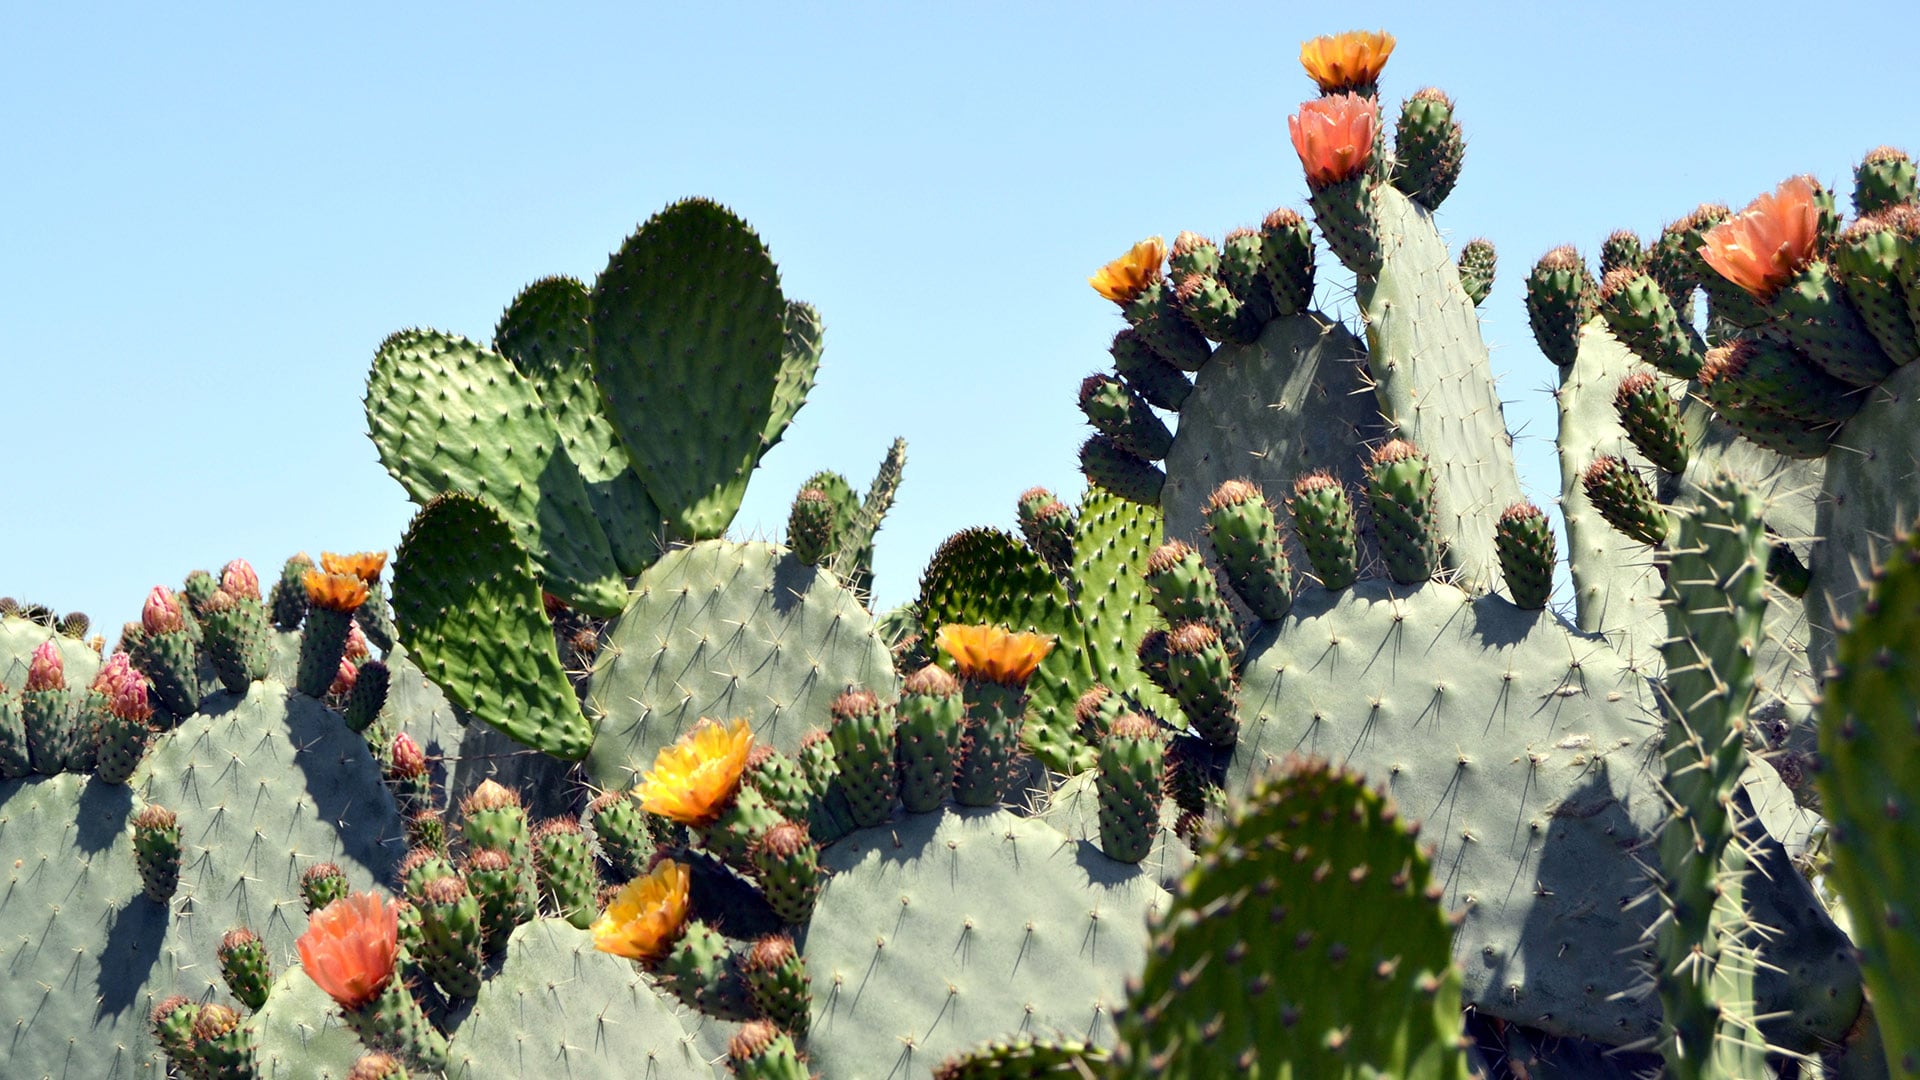 Cacti in bloom on sunny day